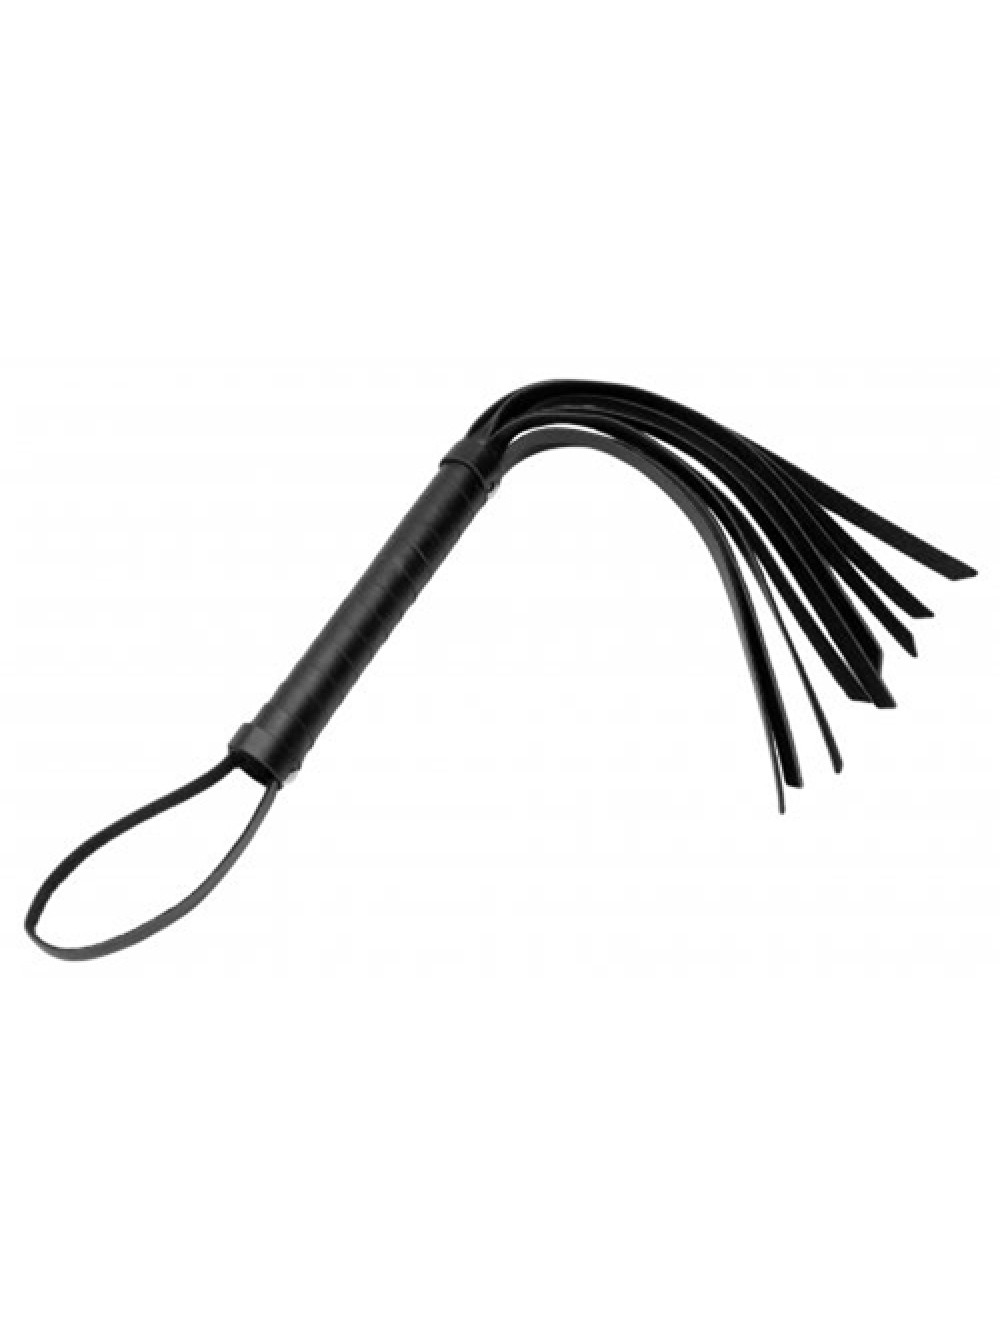 Cat Tails Vegan Leather Hand Whip 848518006493